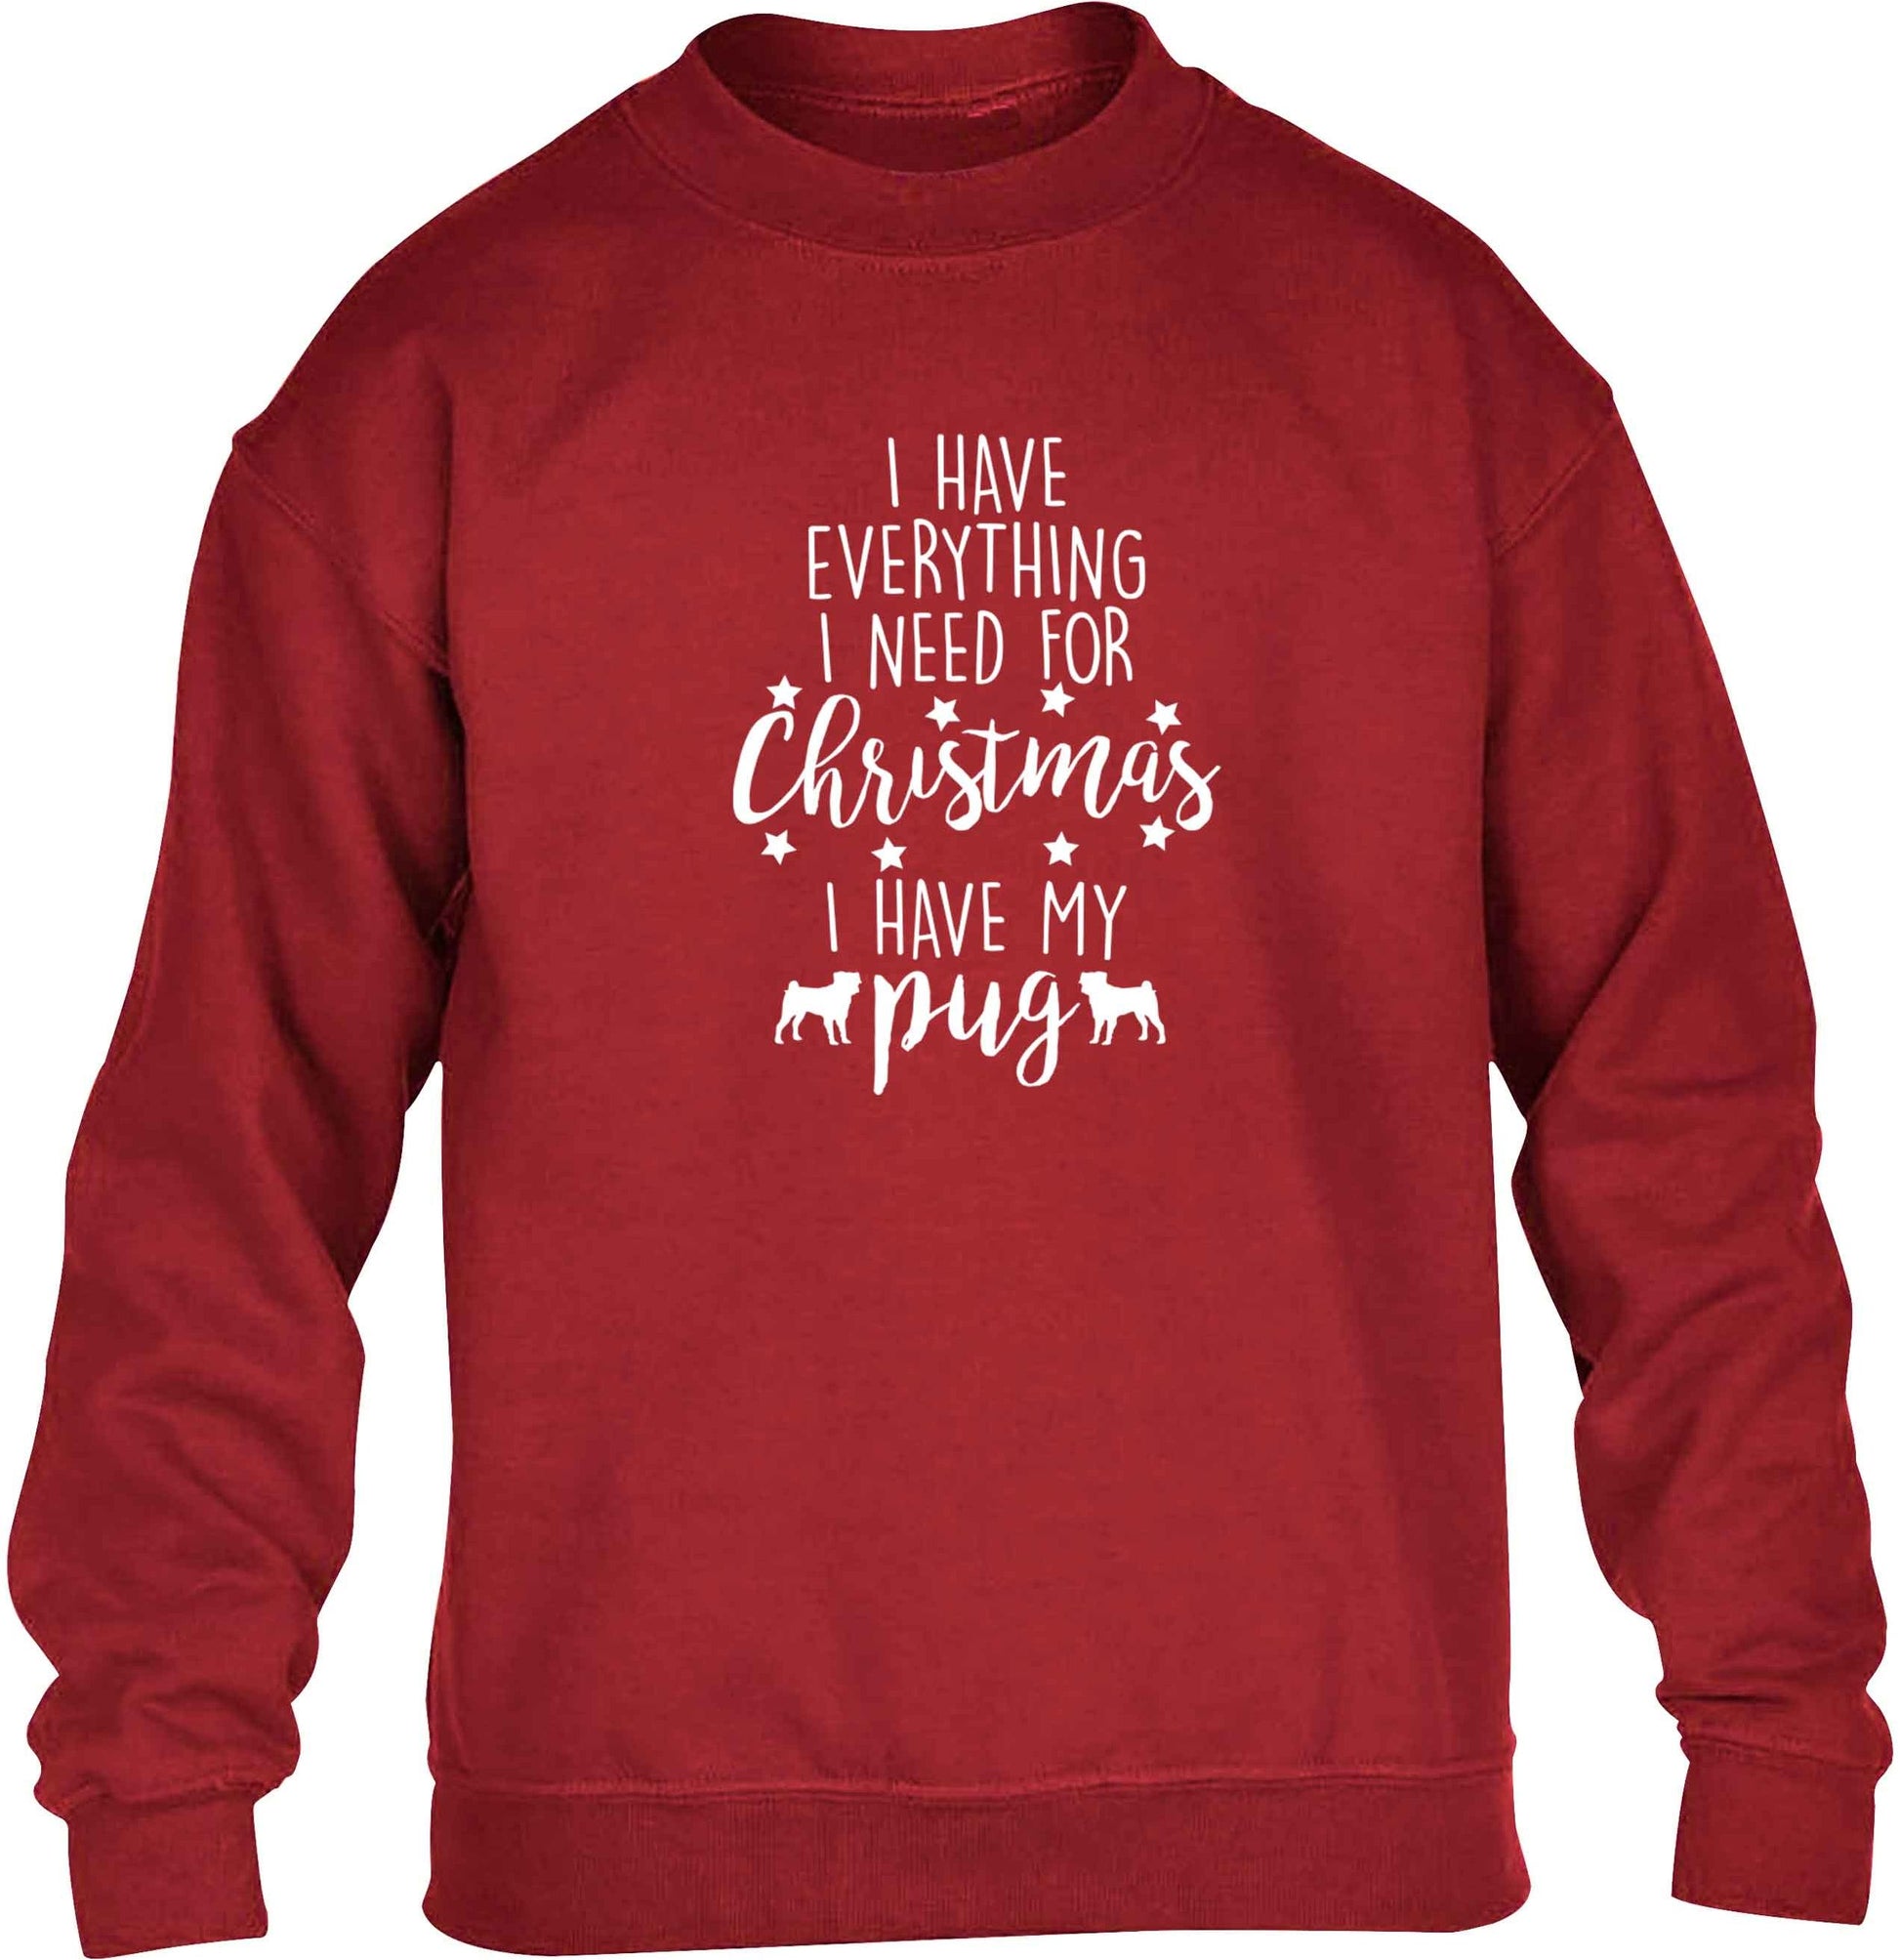 I have everything I need for Christmas I have my pug children's grey sweater 12-13 Years